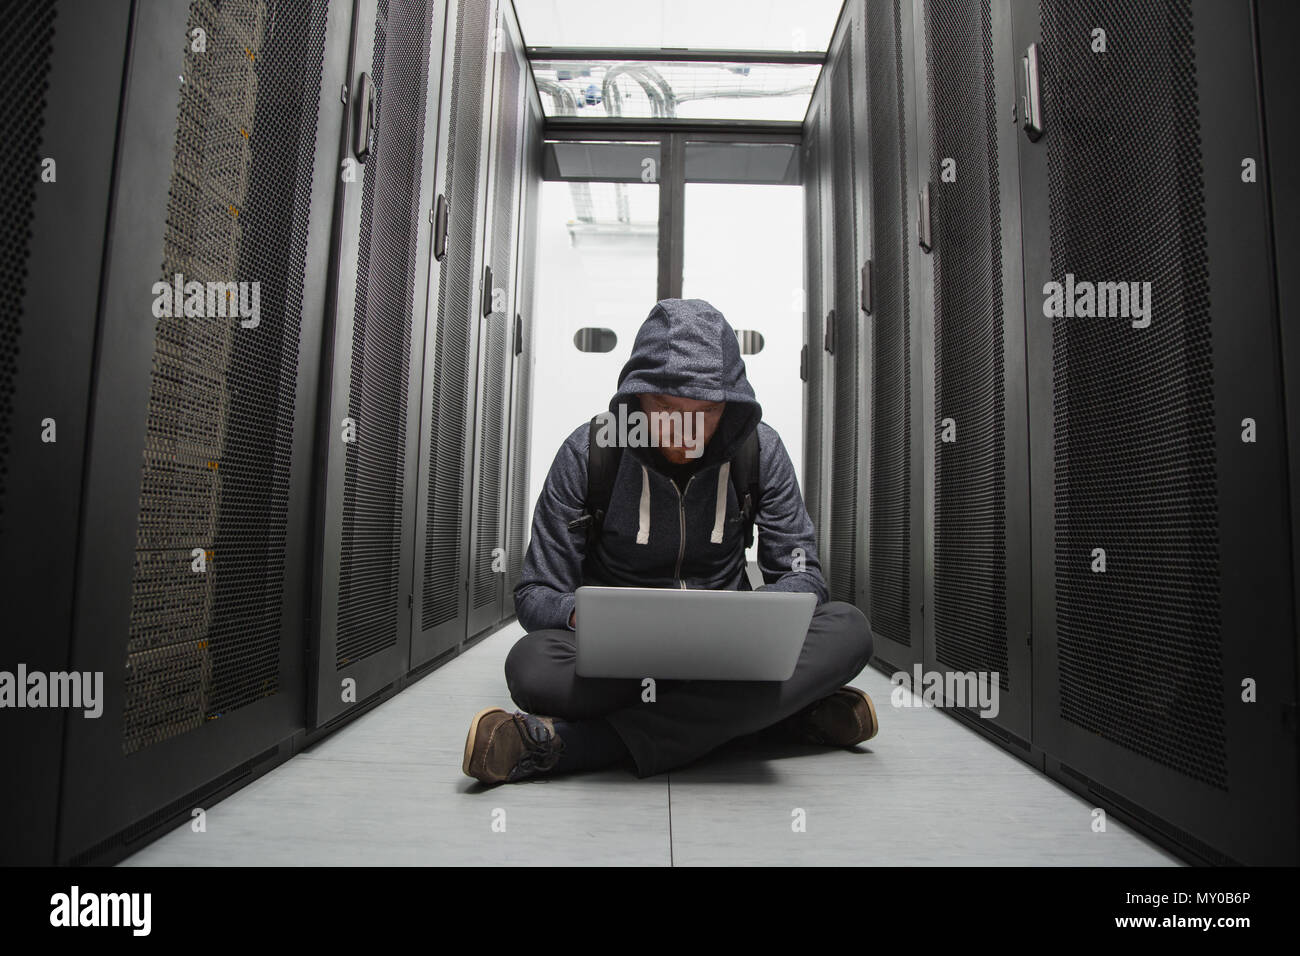 Focused male hacker cracking software Stock Photo